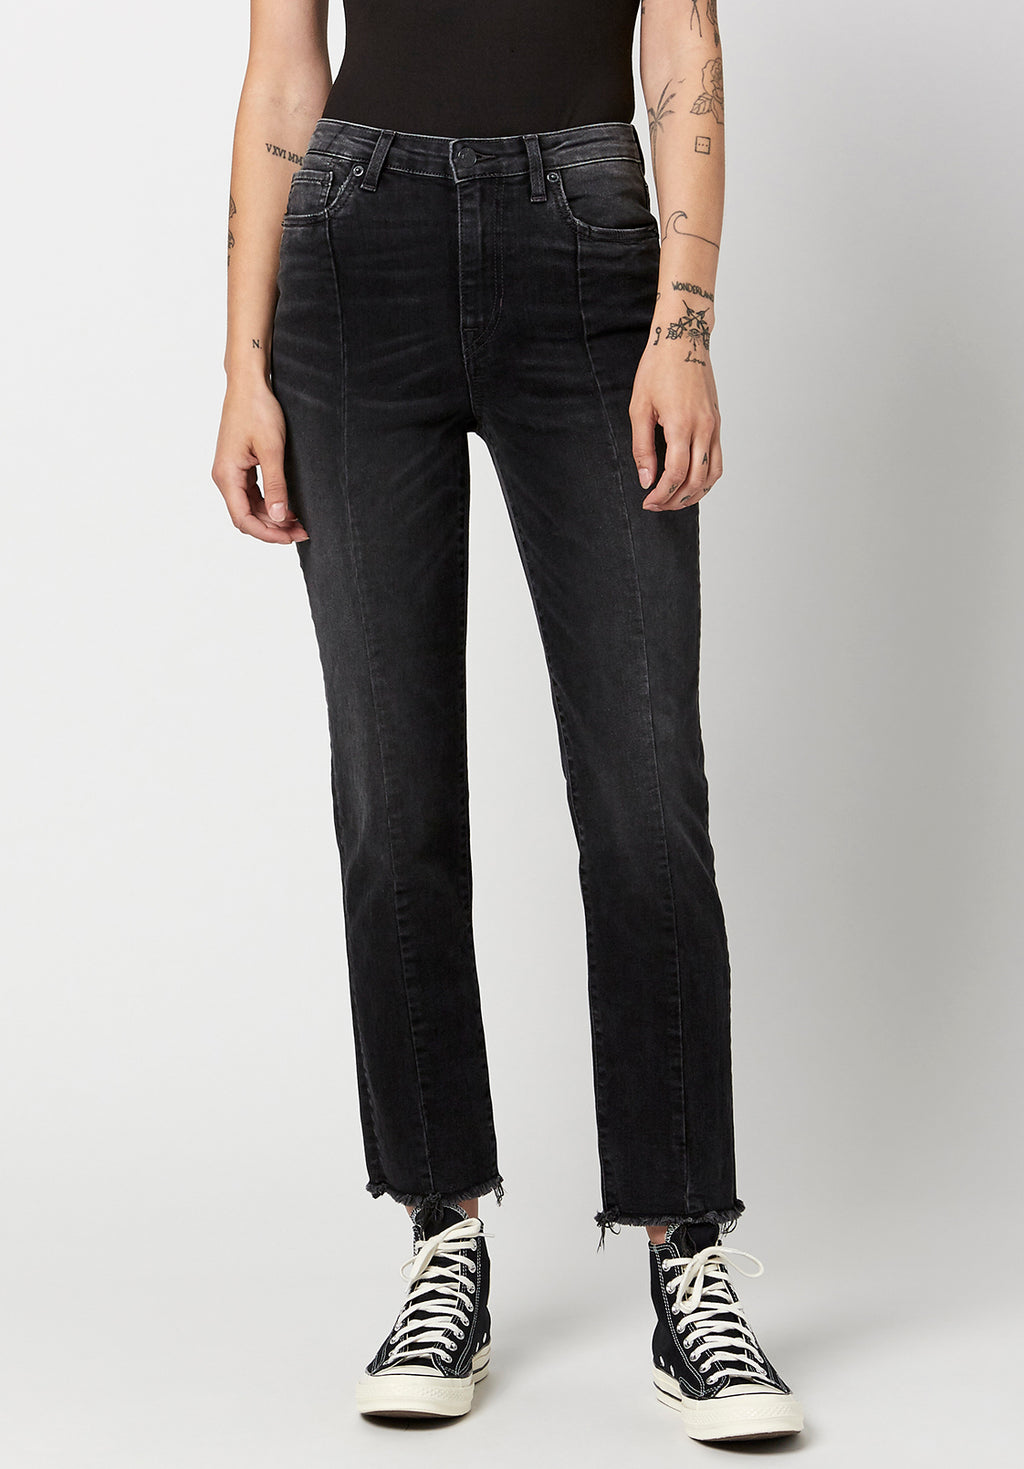 High-Waisted Cheeky Flare Jean, 40% OFF